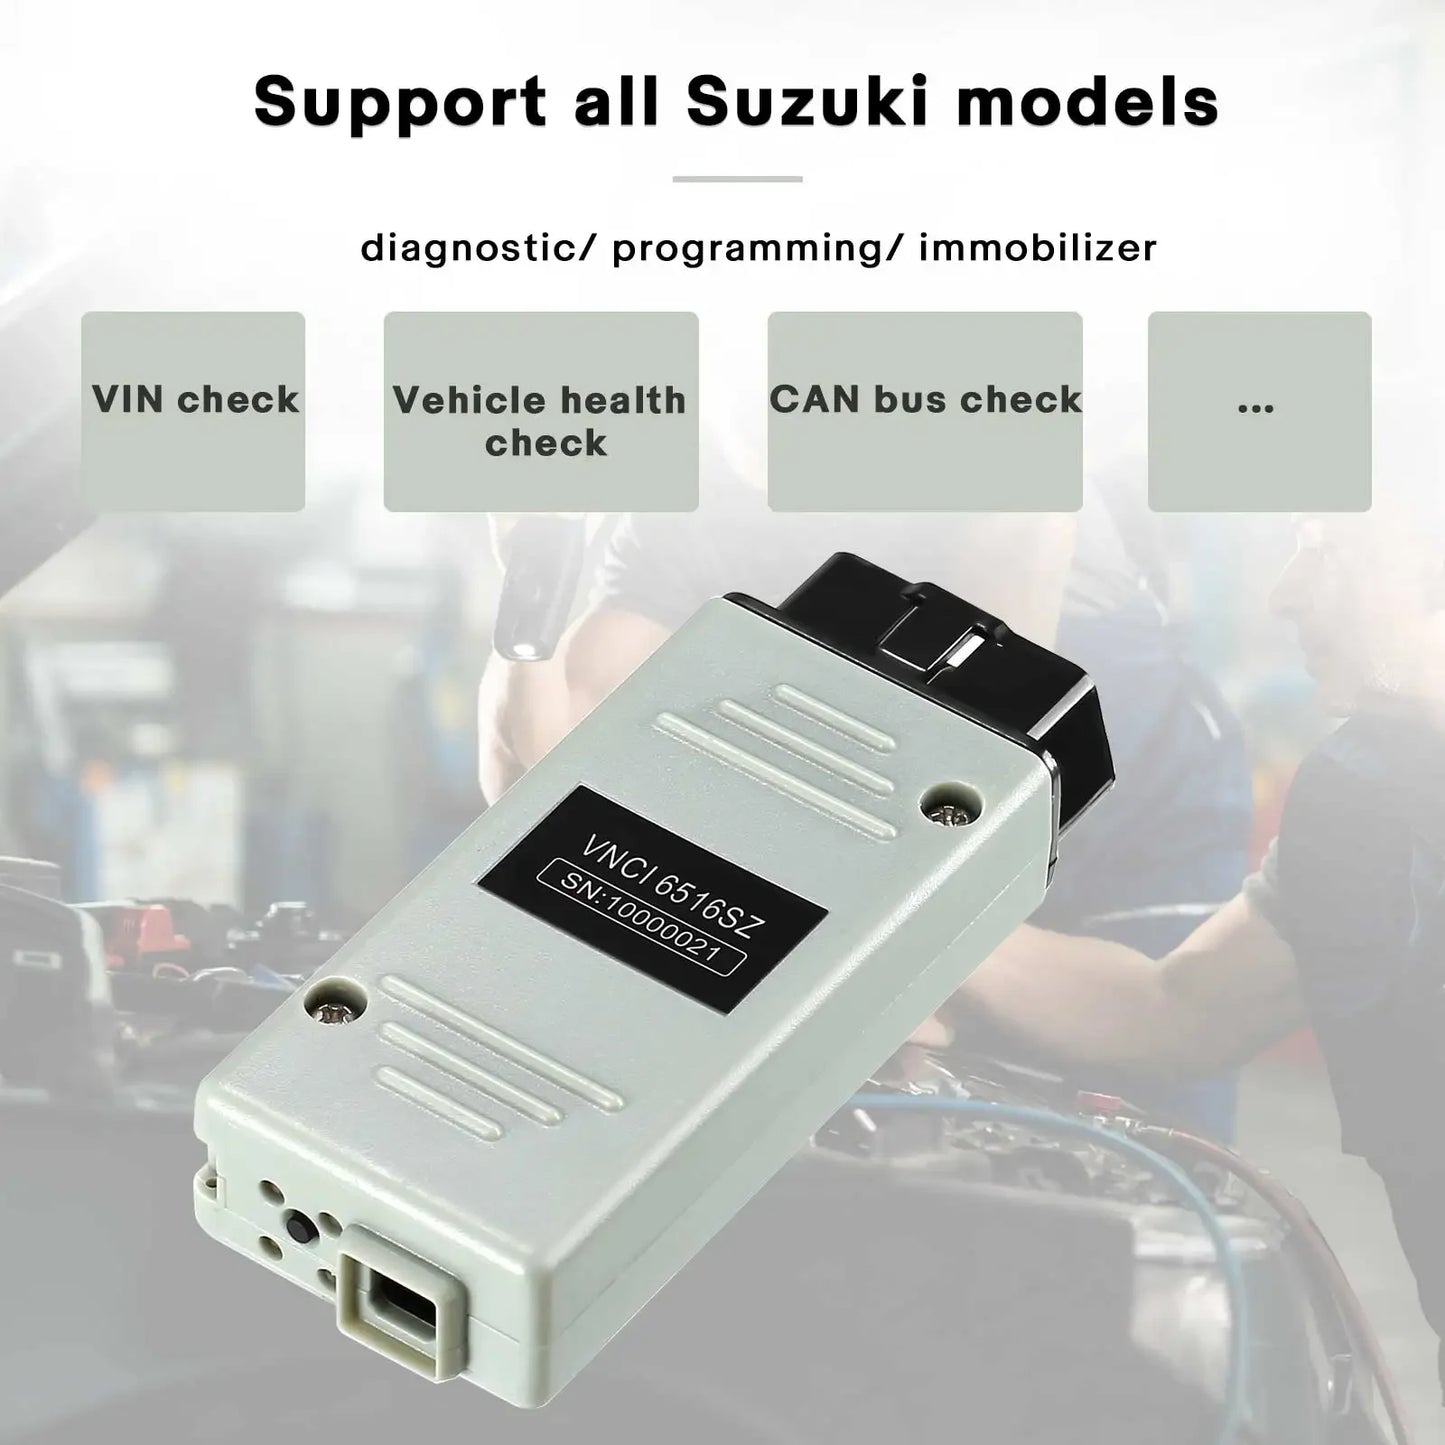 VNCI 6516SZ for Suzuki Car Diagnostic Tool Compatible with SDT-II OEM Software Driver Supports WiFi USB and WLAN